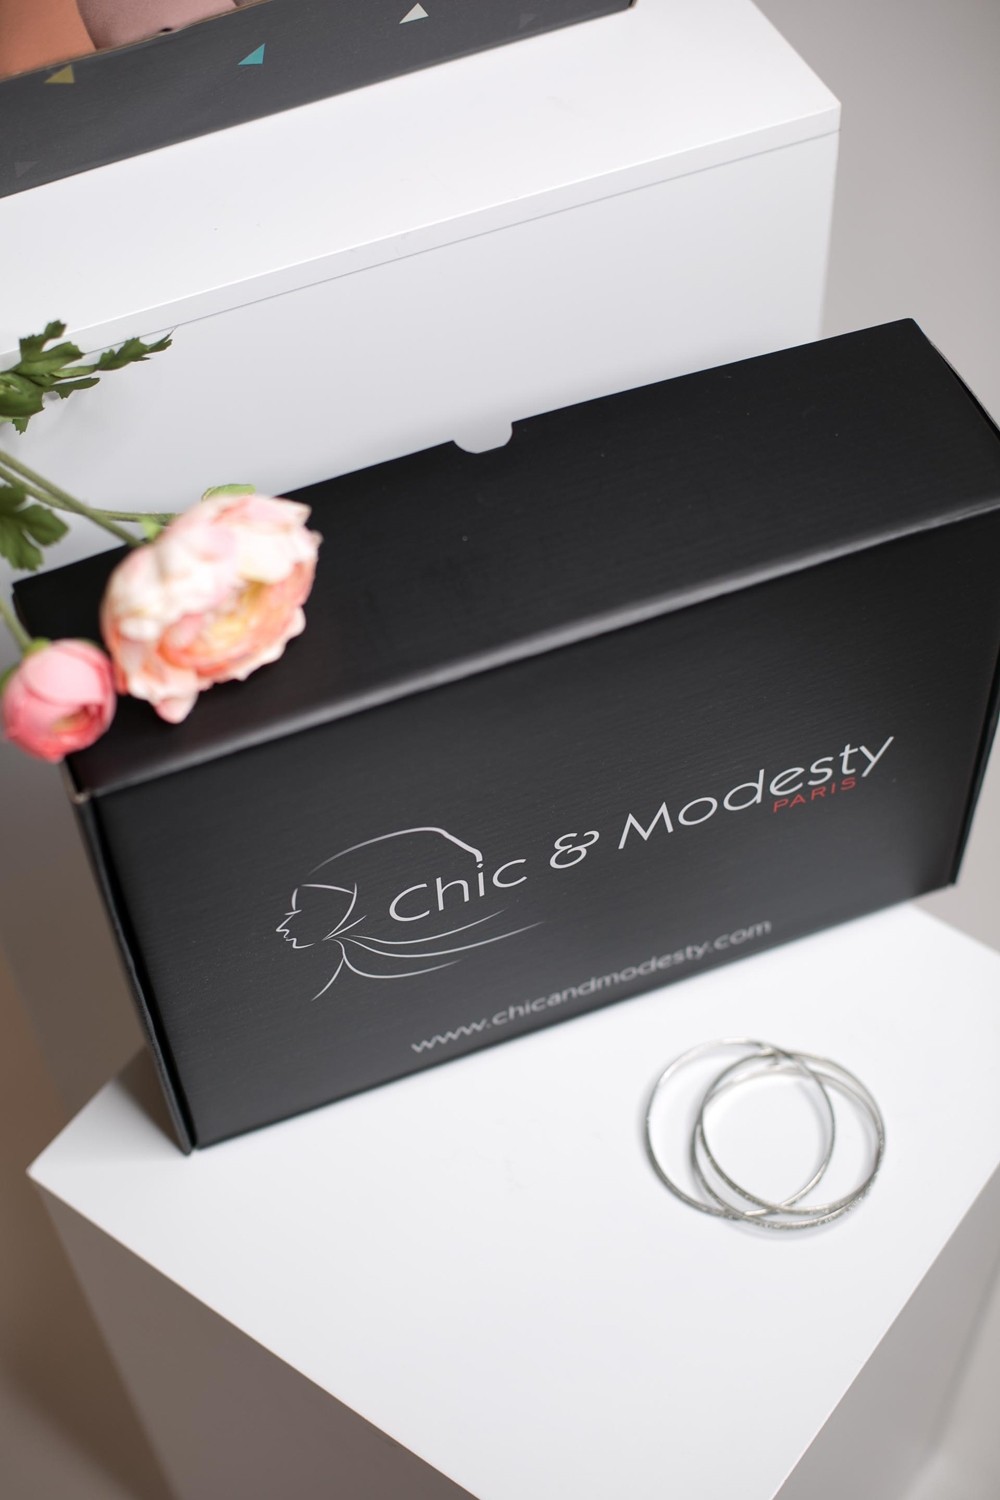 Chic and modesty gift box